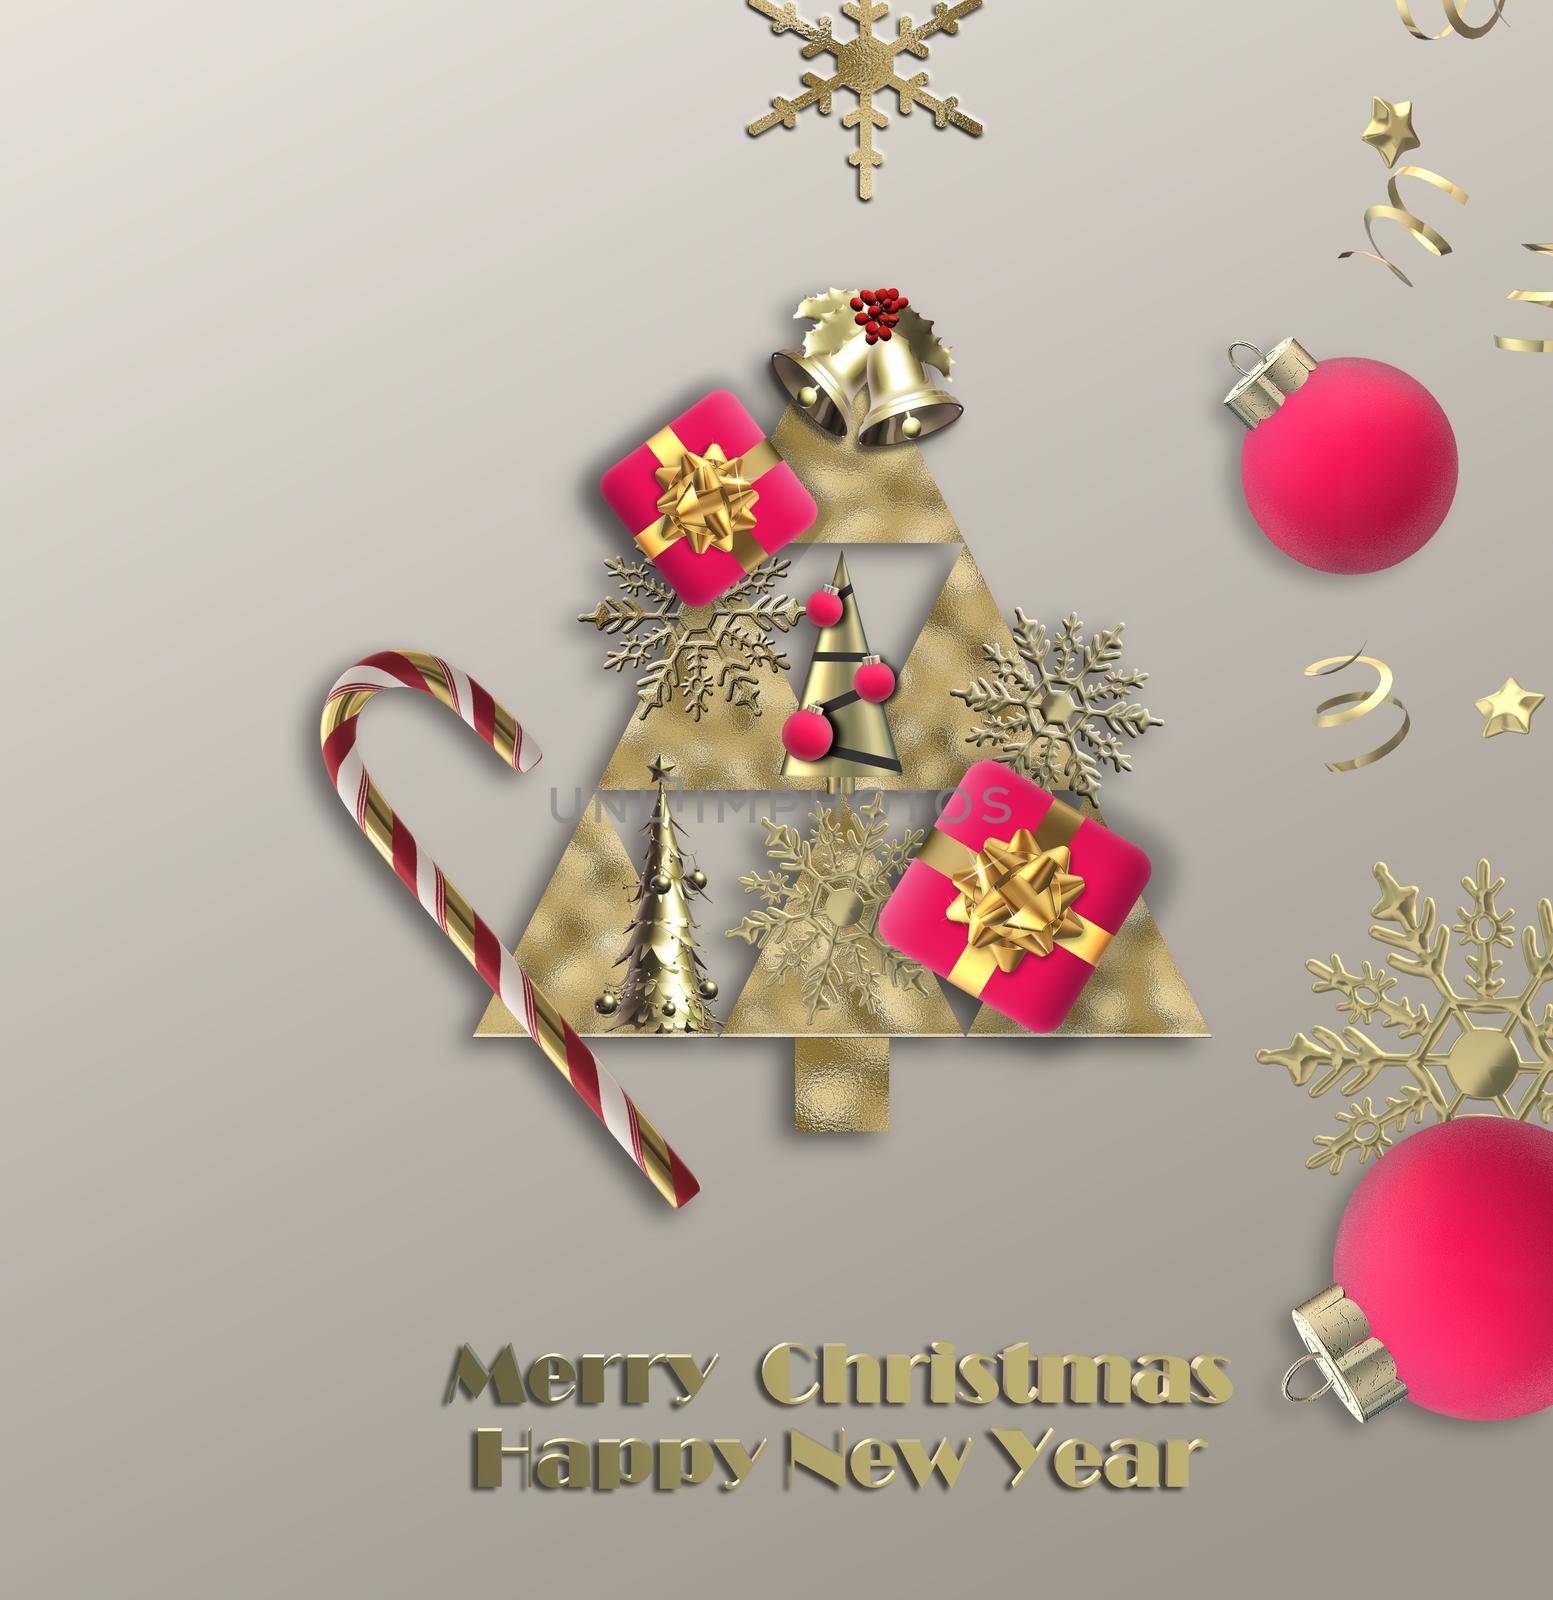 Merry Christmas New Year greeting card. Abstract holiday design with Xmas tree, balls baubles, gift box in pastel colours. Gold text Merry Christmas Happy New Year. 3D illustration